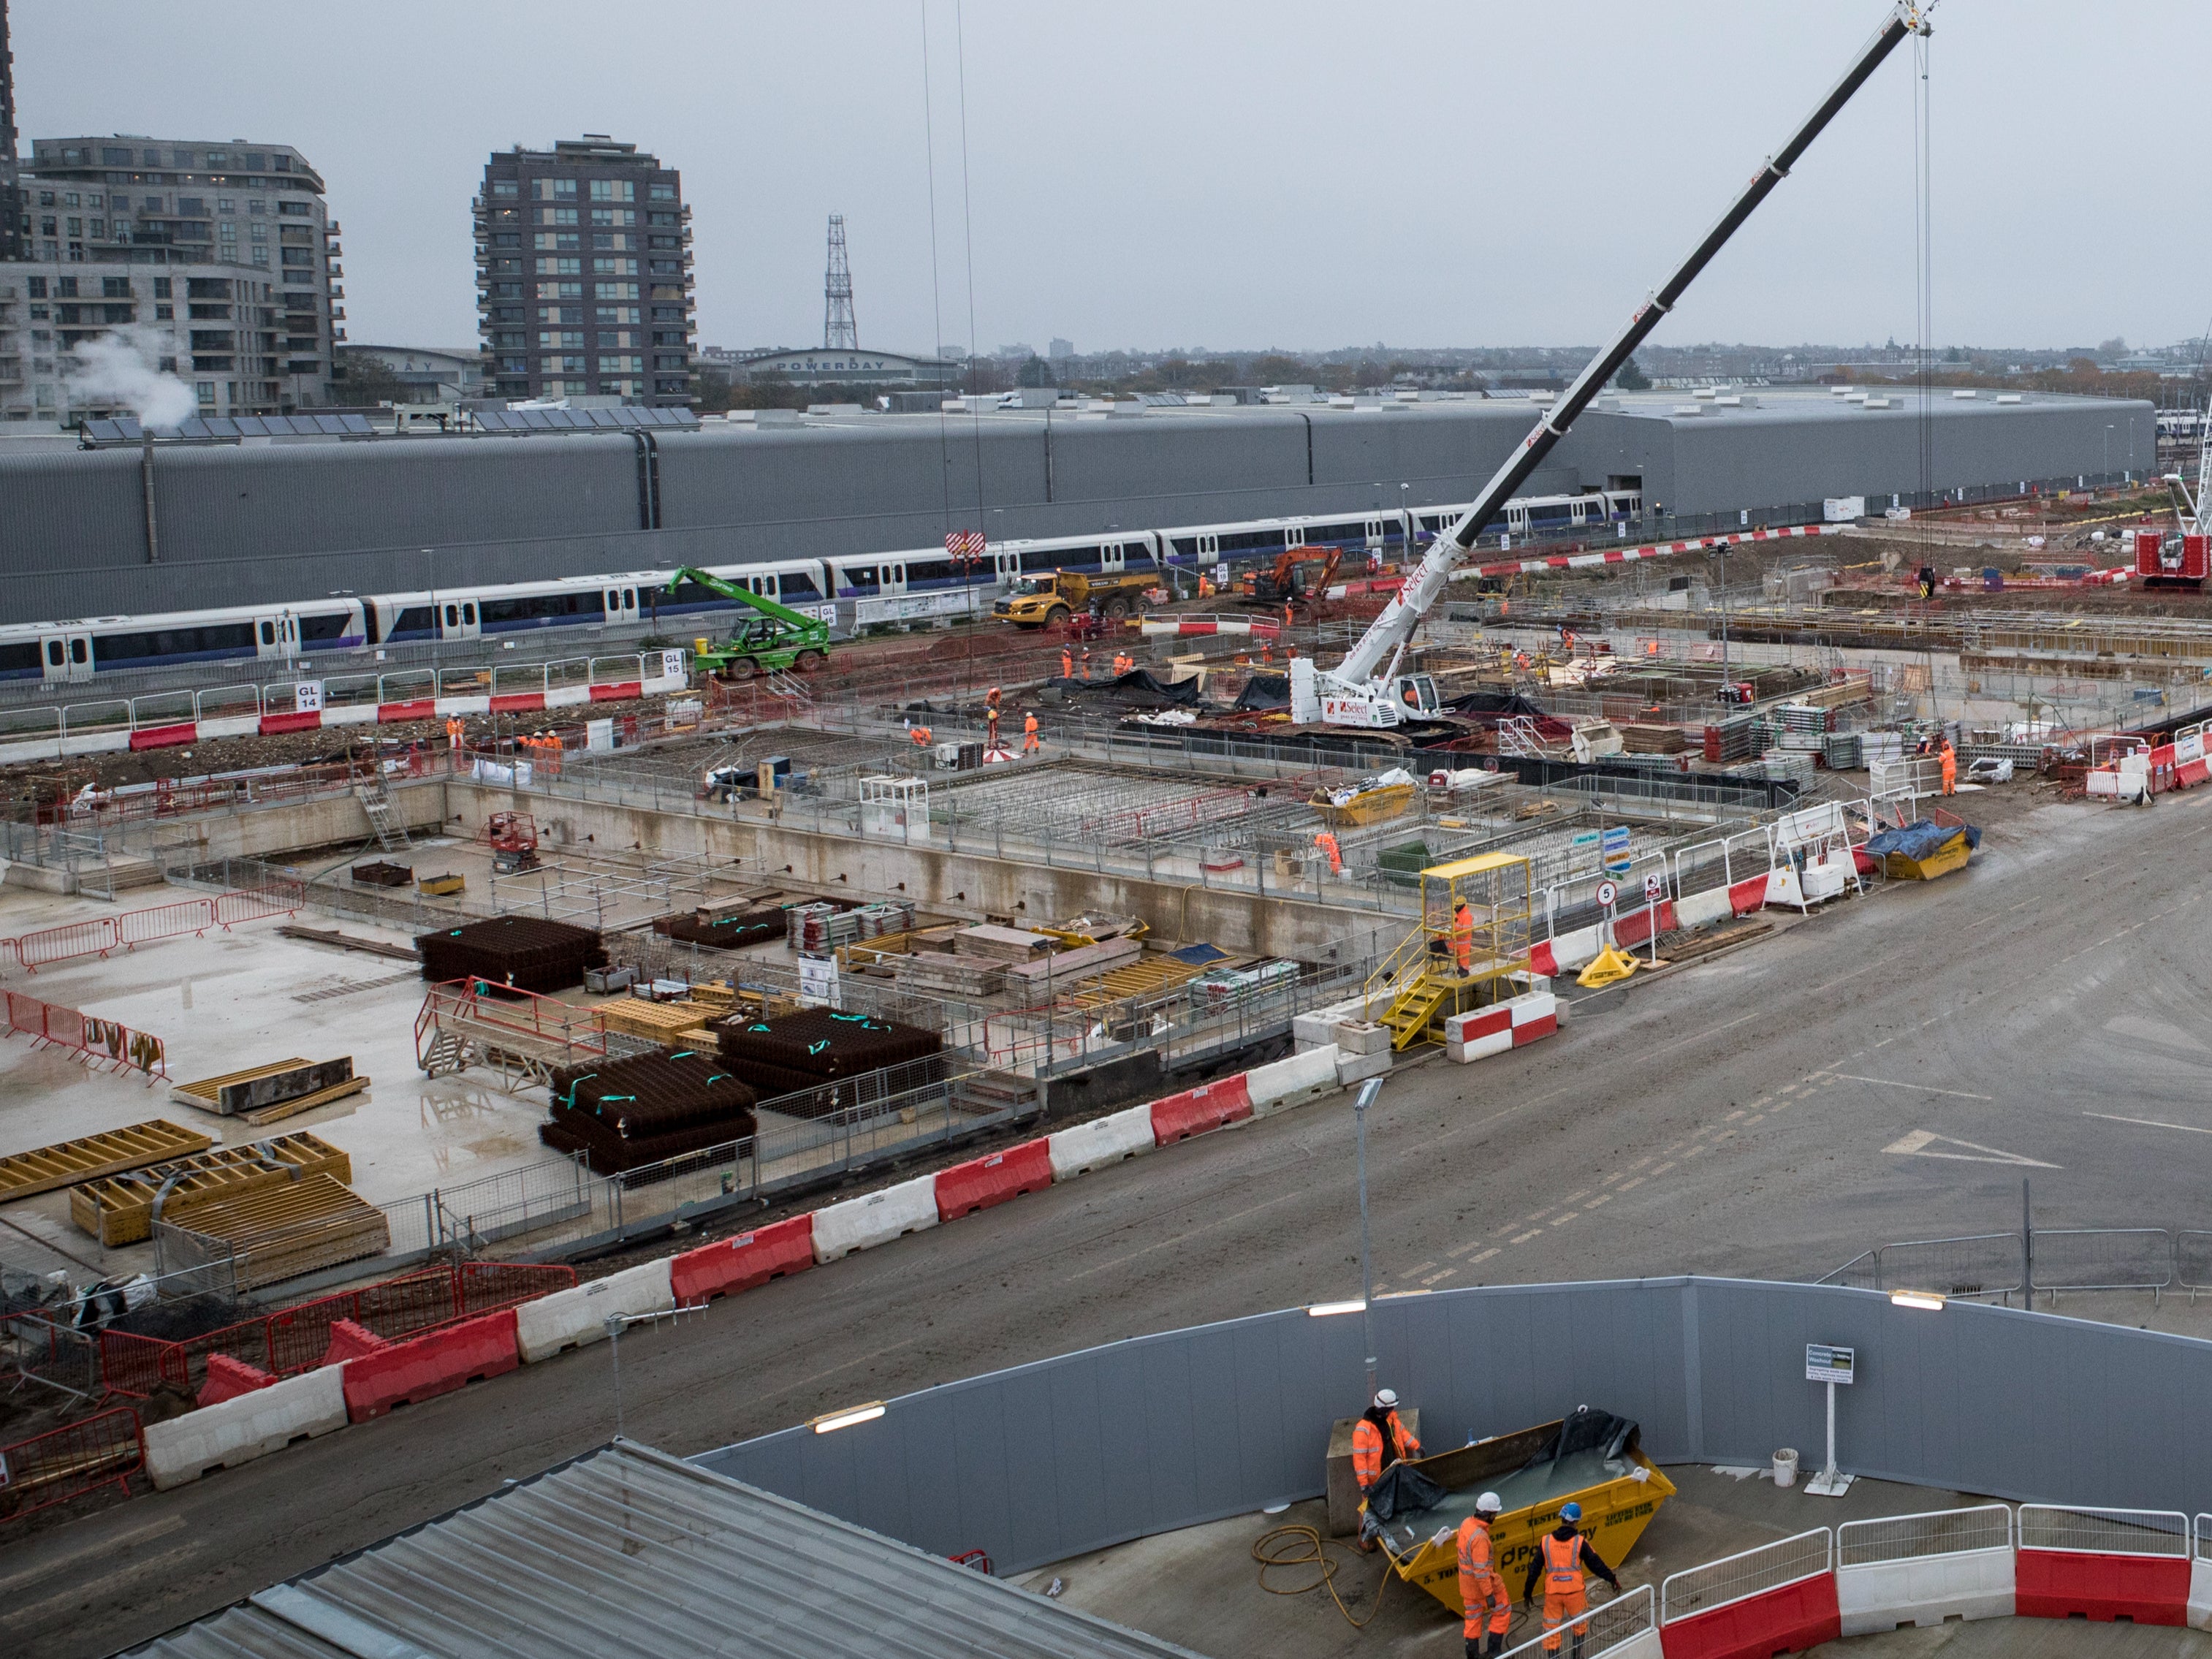 Future proof: Work on the new HS2 station at Old Oak Common, west London